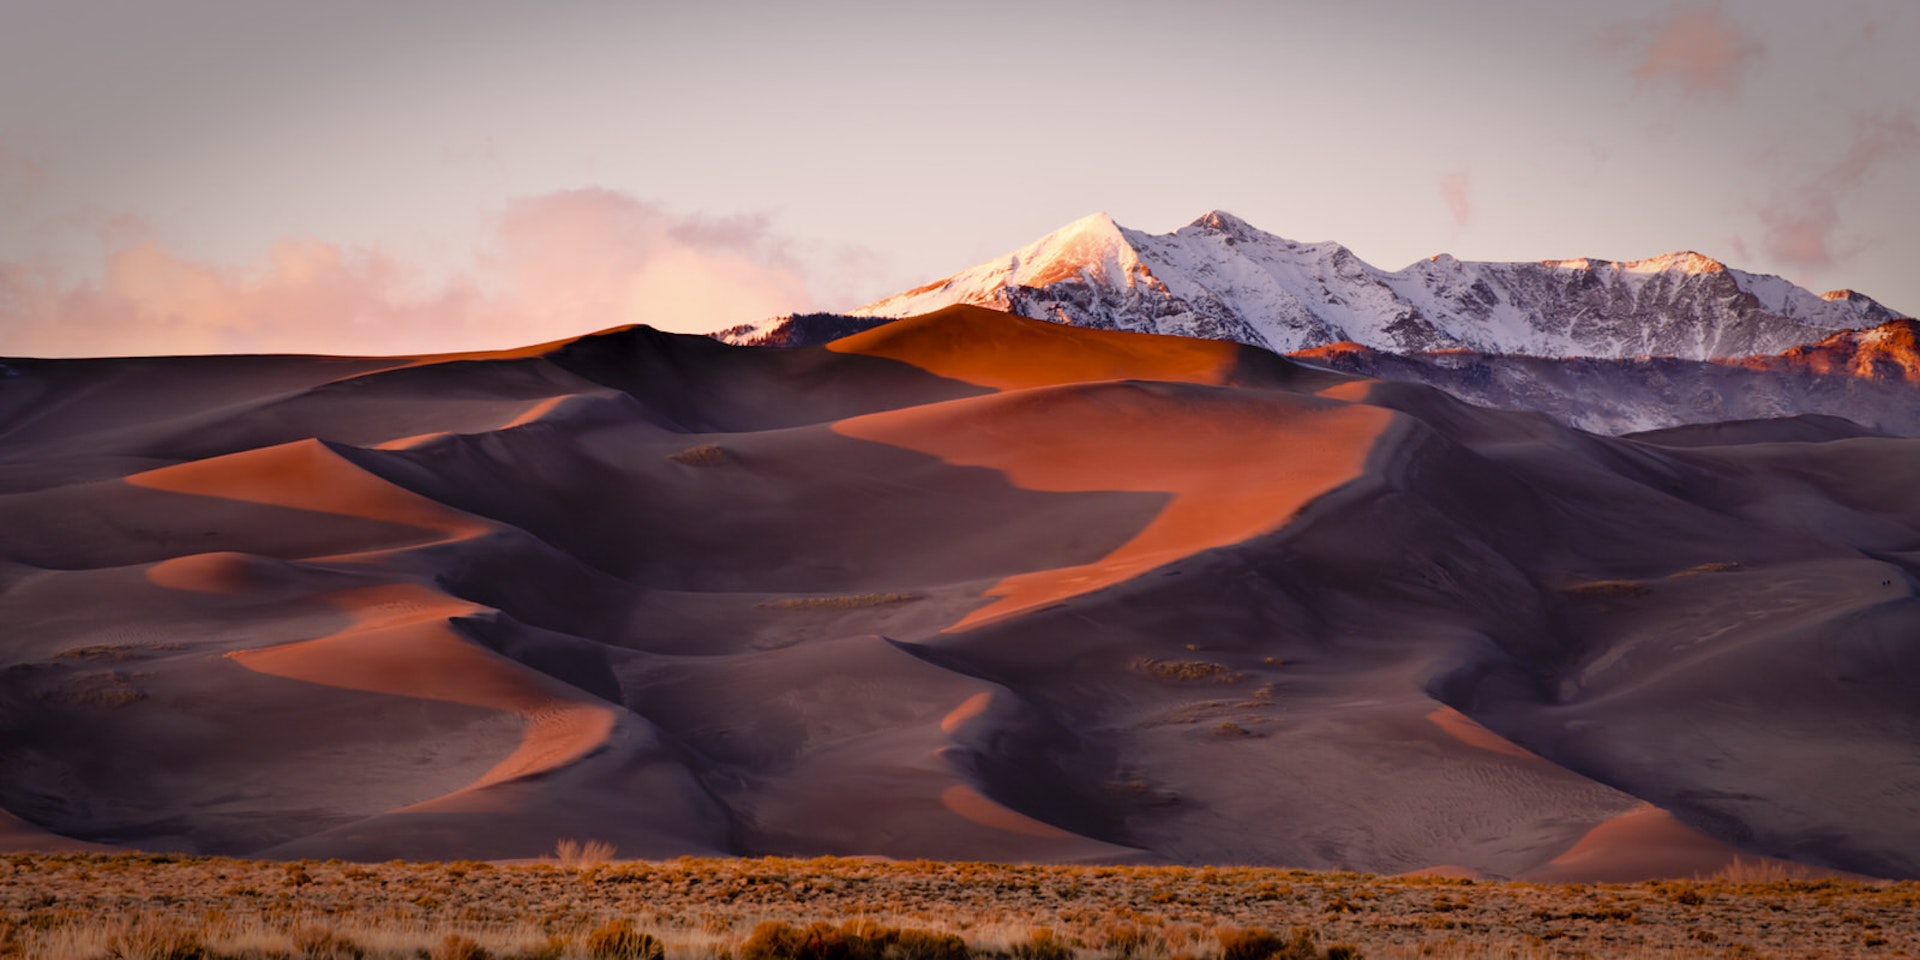 Sand dunes and mountain peaks are lit with evening light at Great Sand Dune National Park, Alamosa, Colorado © Dan Ballard / Getty Images